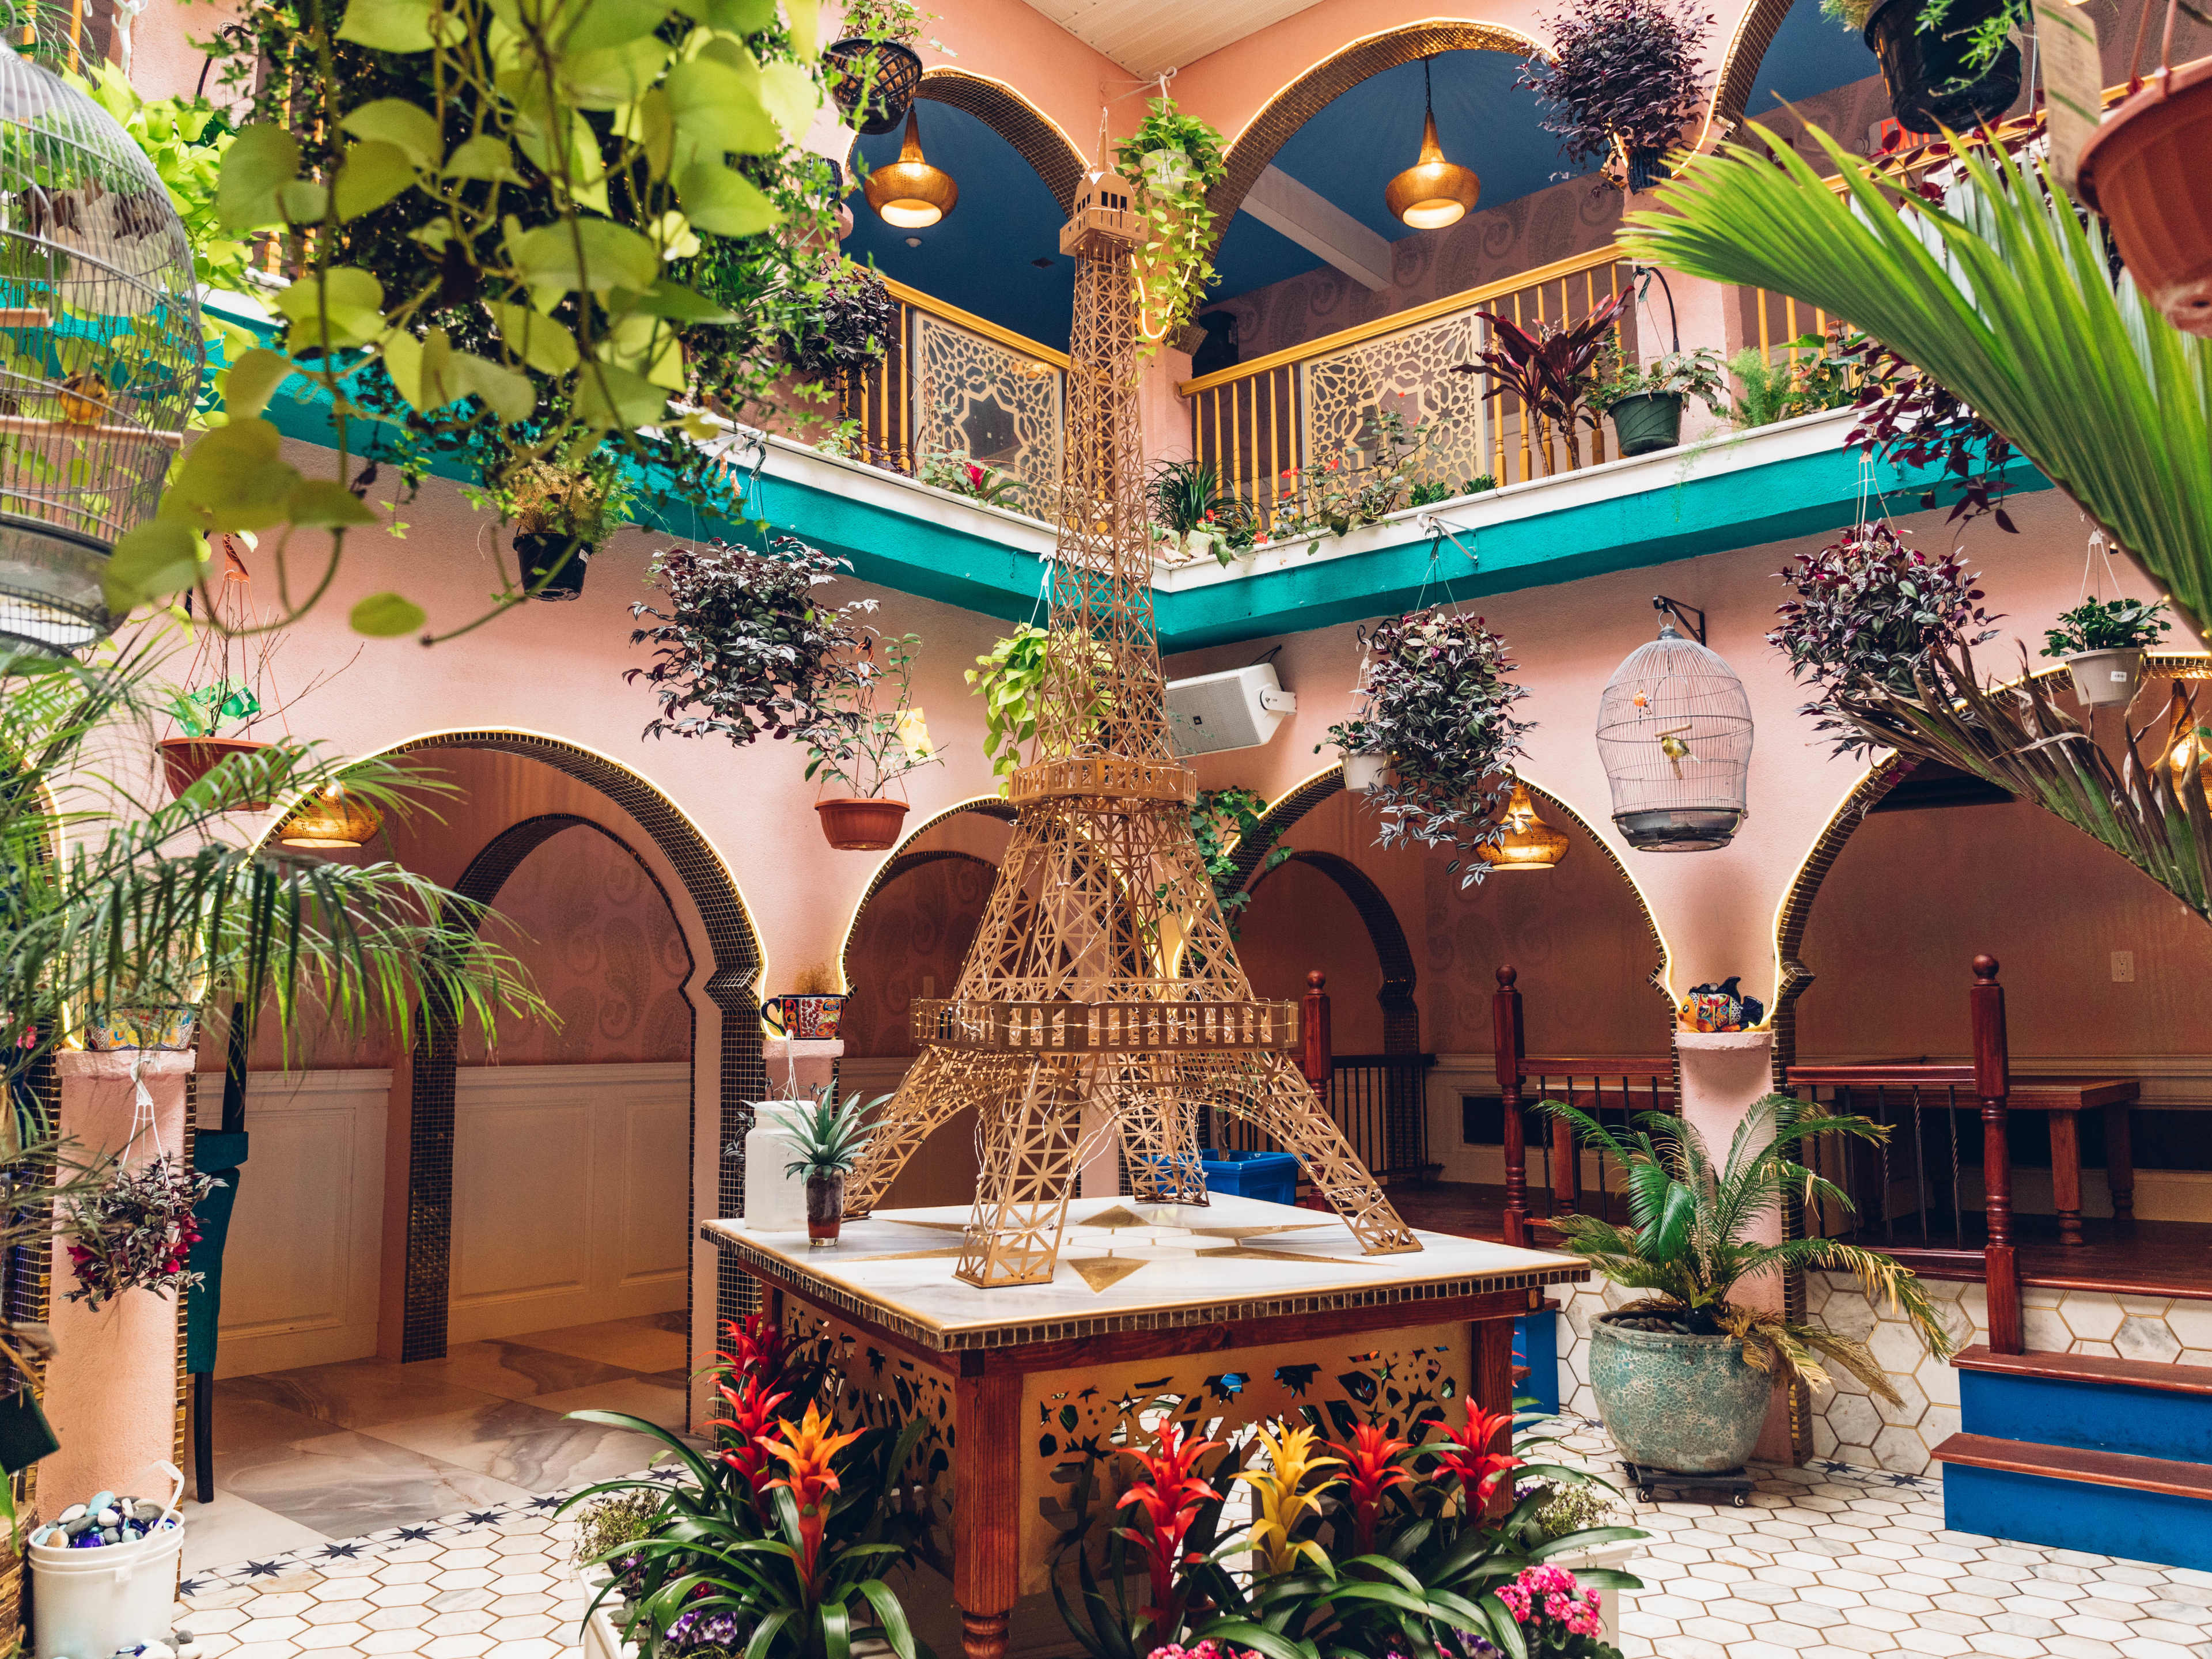 A pink courtyard with a model Eiffel Tower and tropical plants.